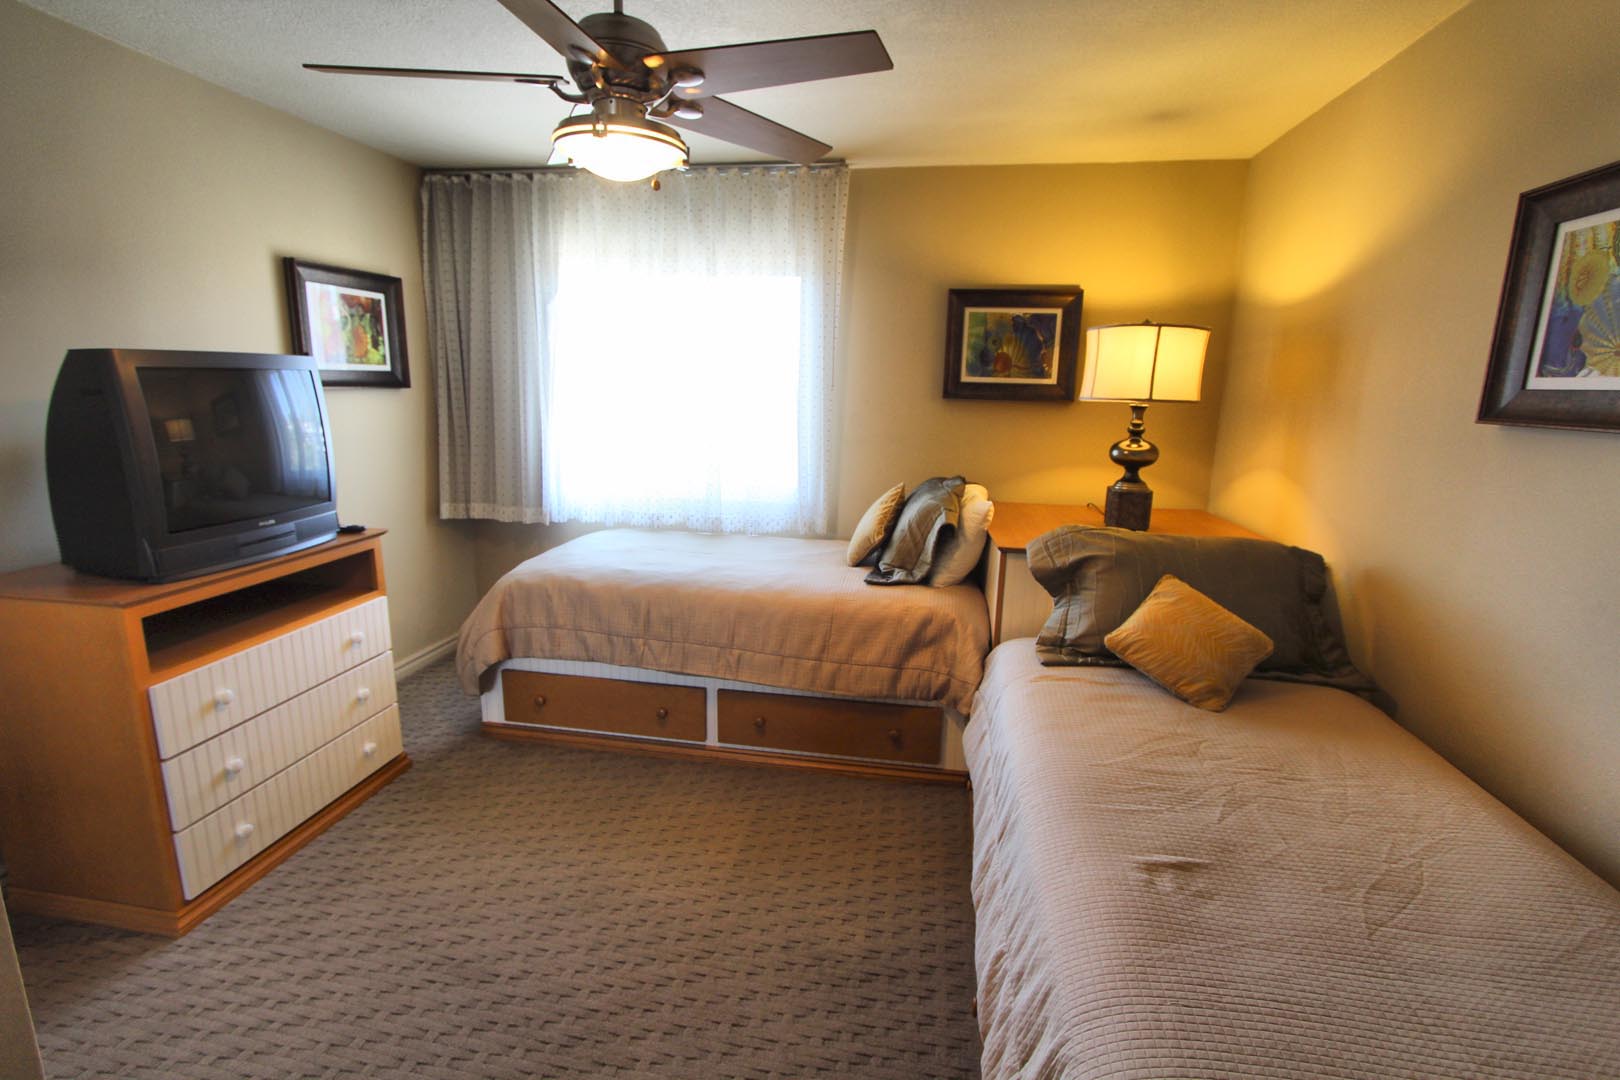 A bedroom with double beds at VRI's Four Seasons Pacifica in San Clemente, California.